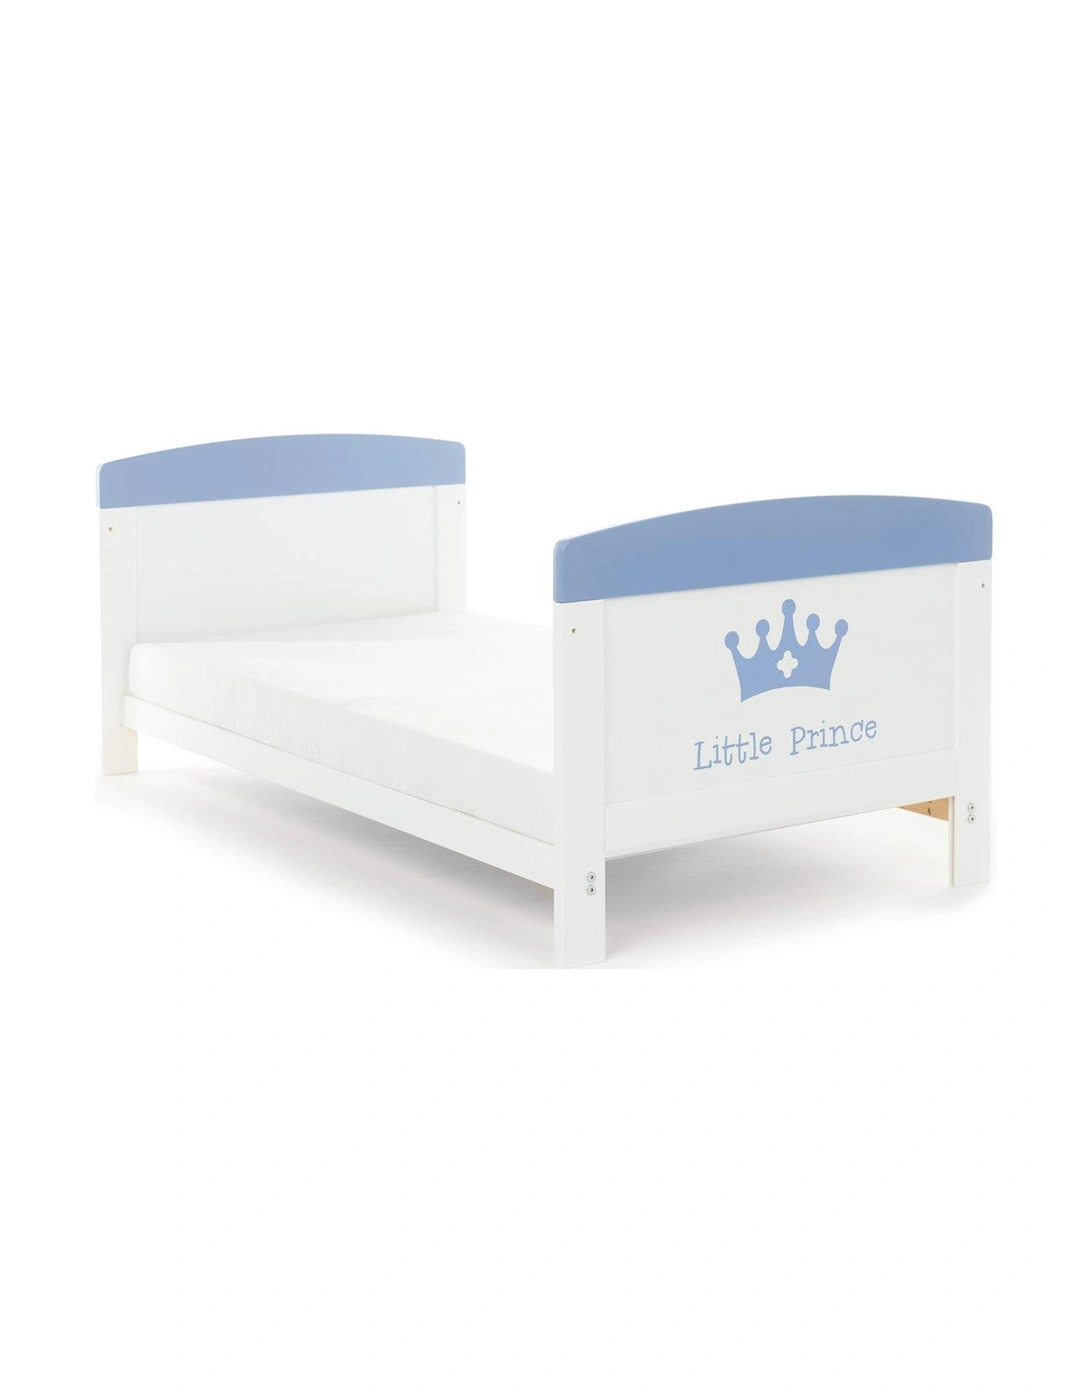 Grace Inspire Cot Bed - Little Prince